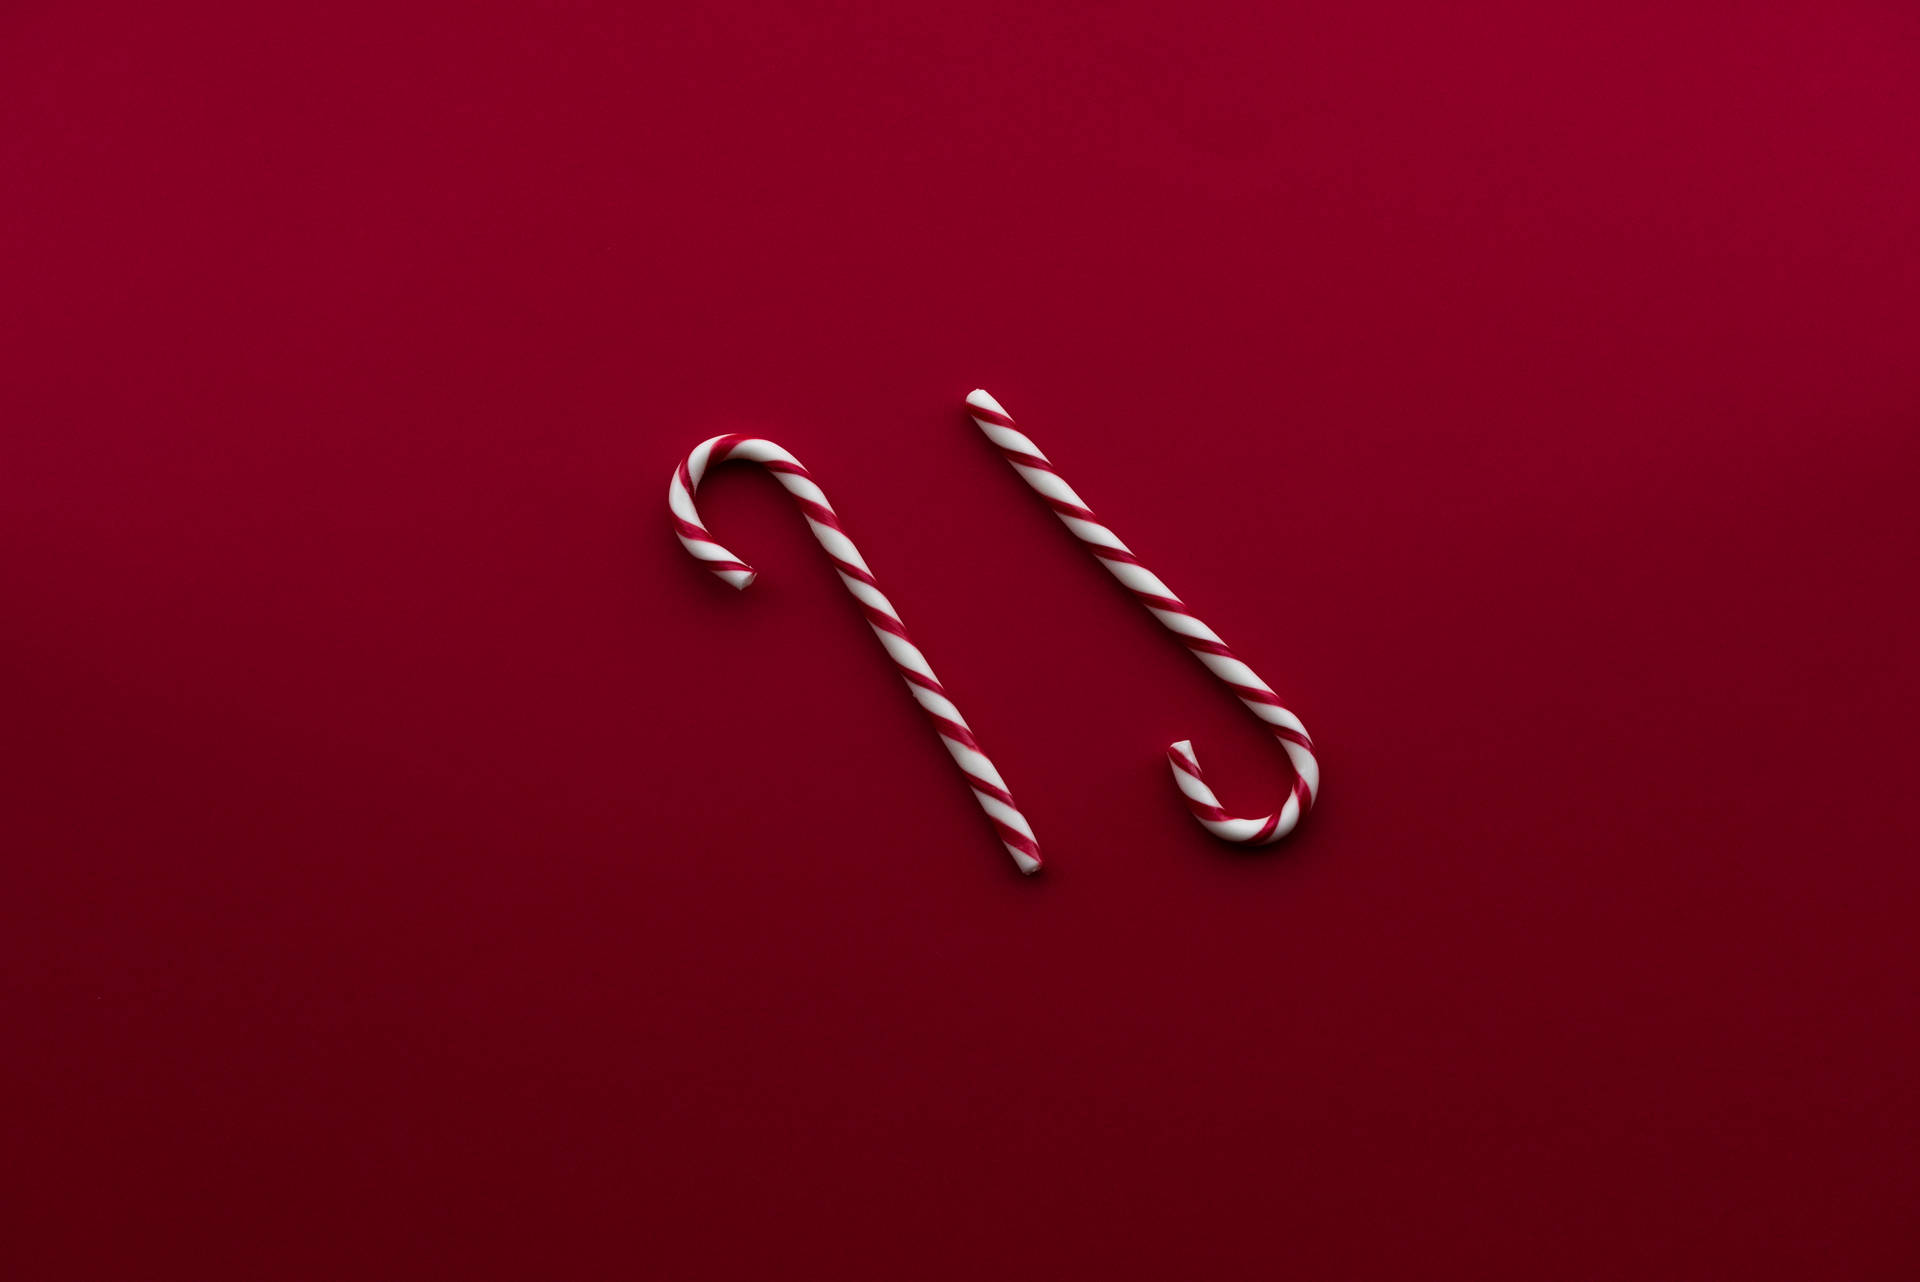 6016X4016 Candy Cane Wallpaper and Background